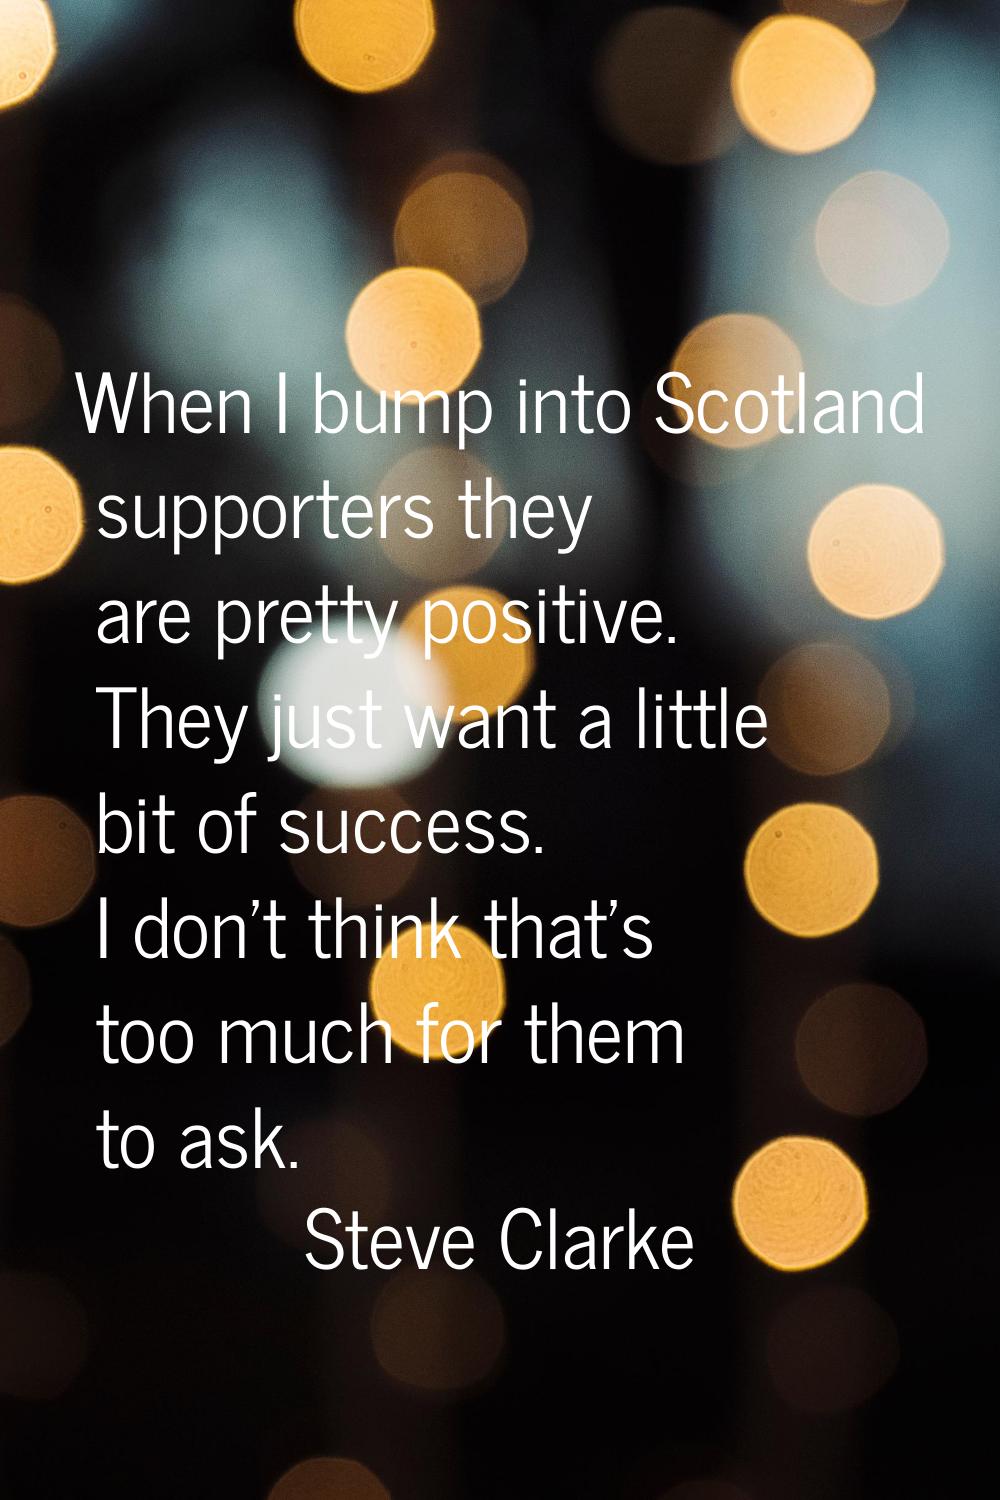 When I bump into Scotland supporters they are pretty positive. They just want a little bit of succe